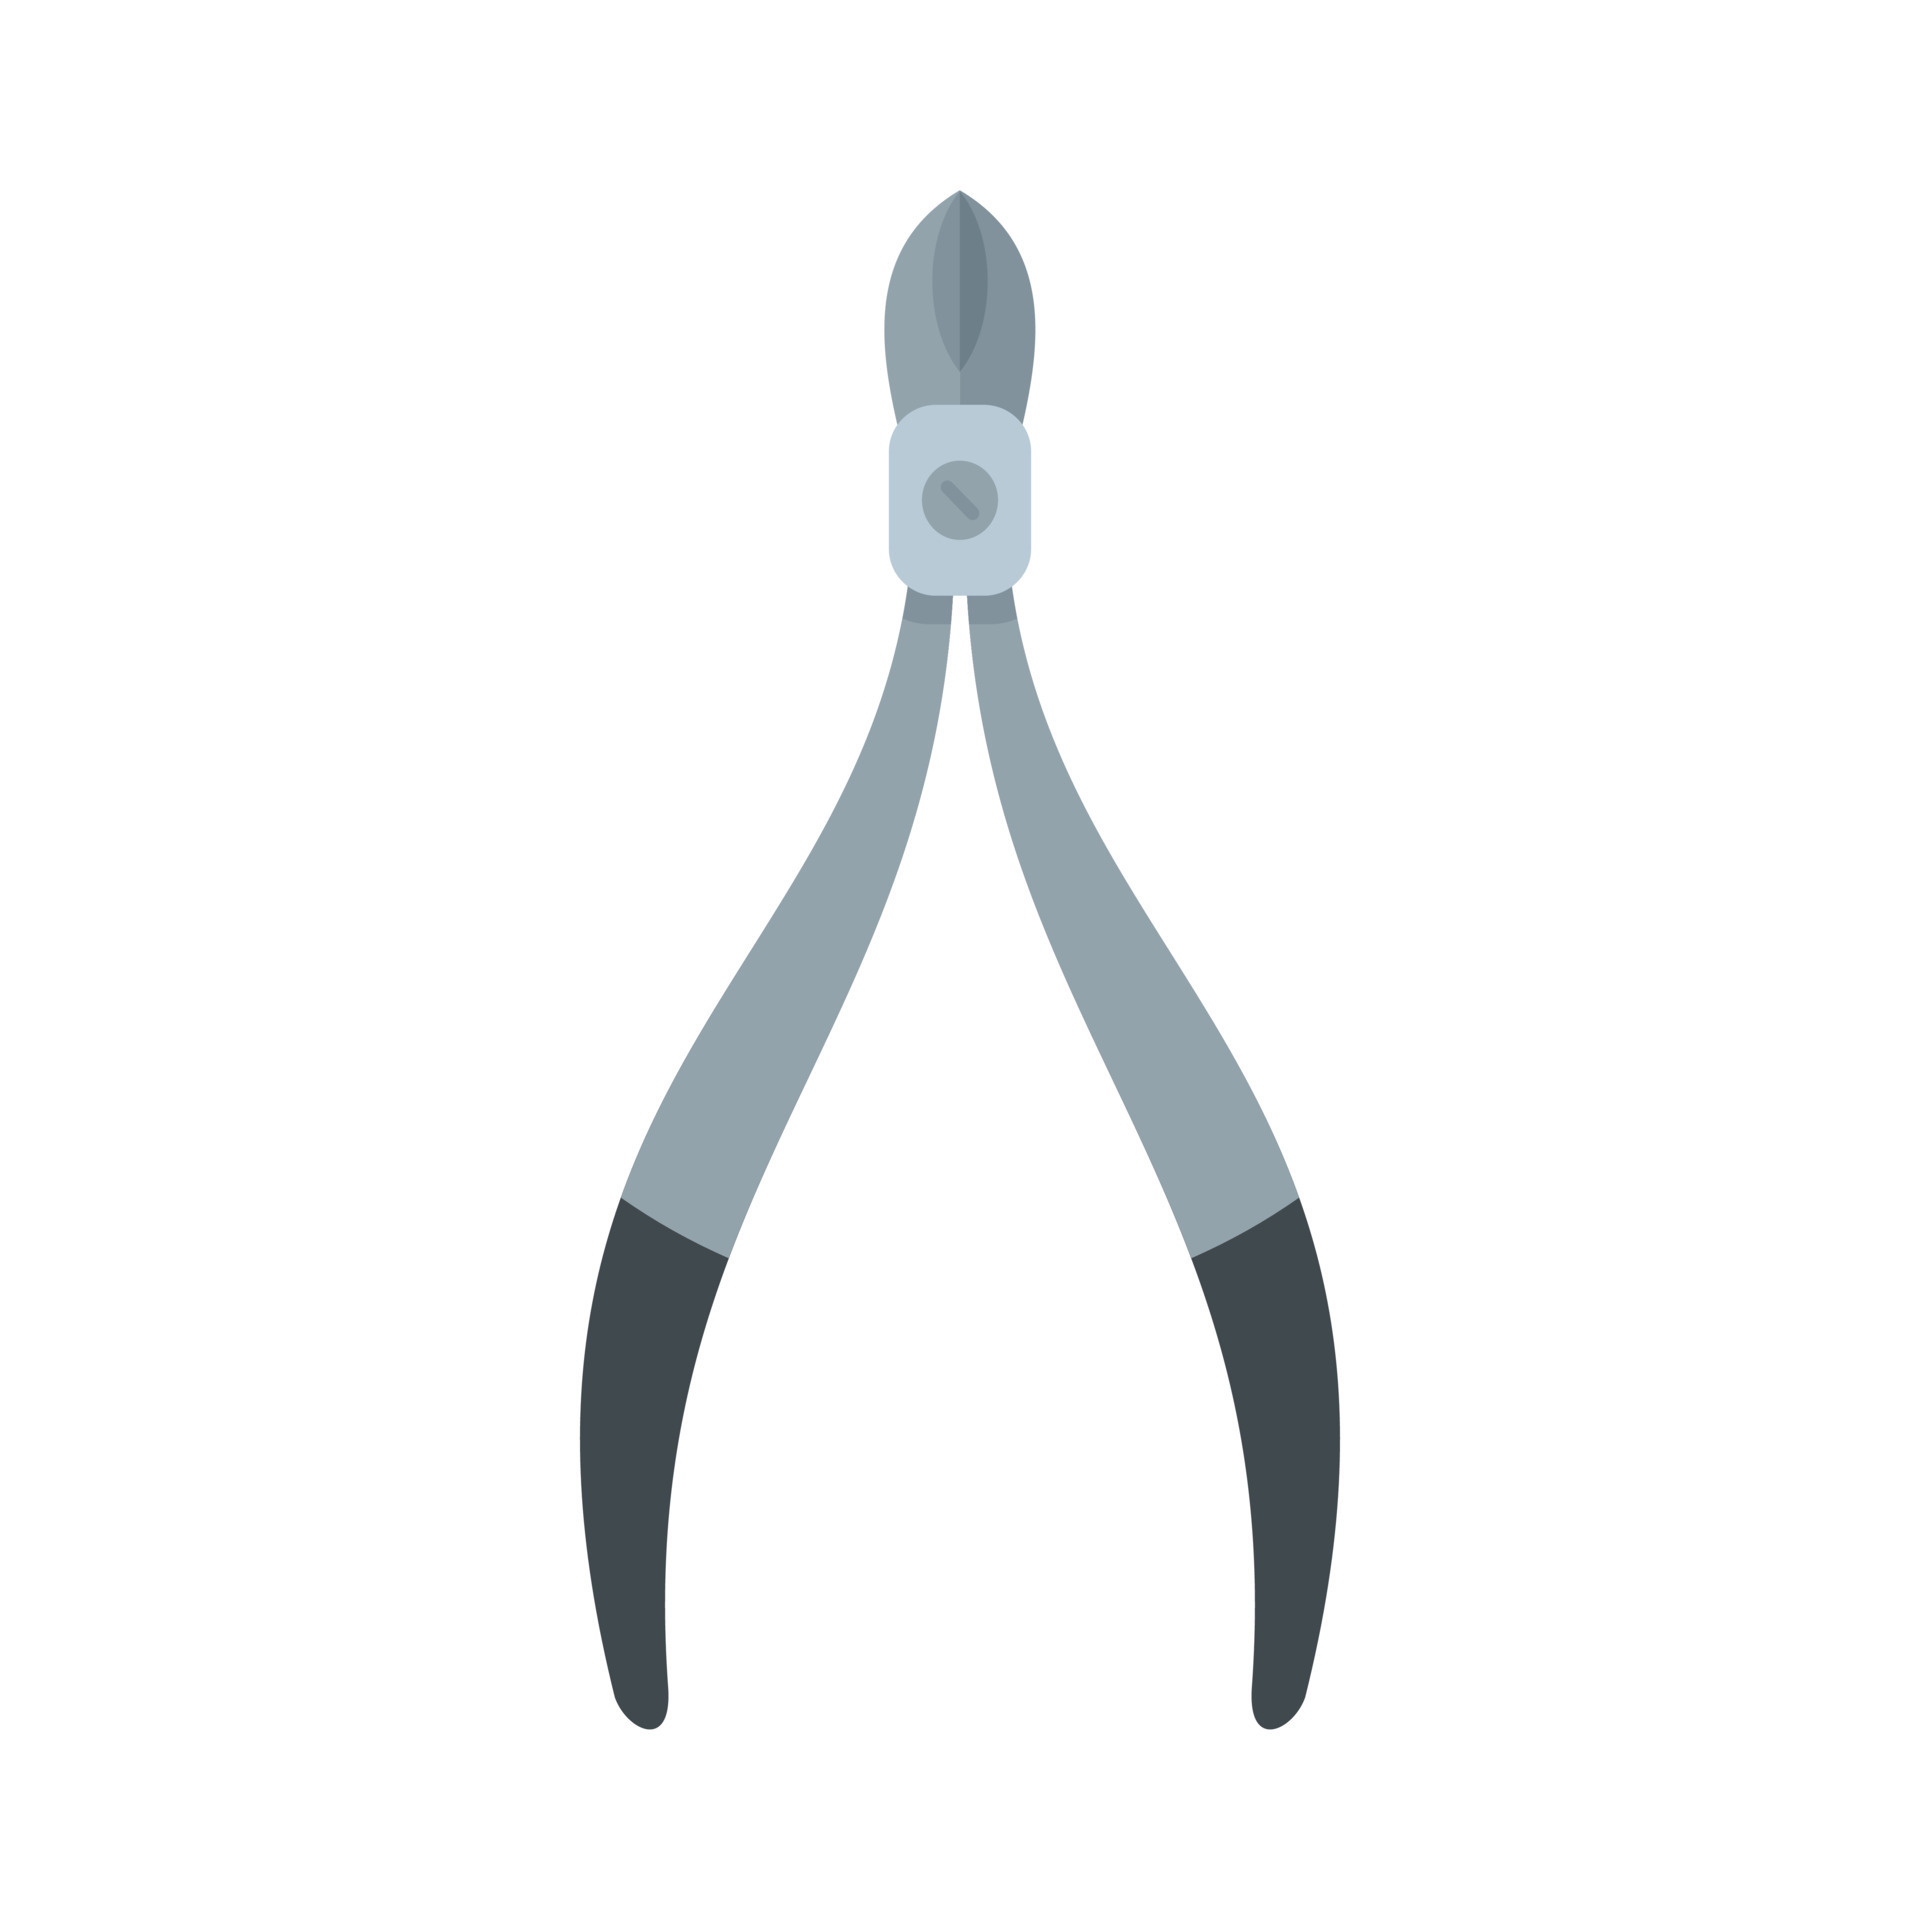 https://static.vecteezy.com/system/resources/previews/014/934/755/original/laboratory-forceps-icon-flat-isolated-vector.jpg